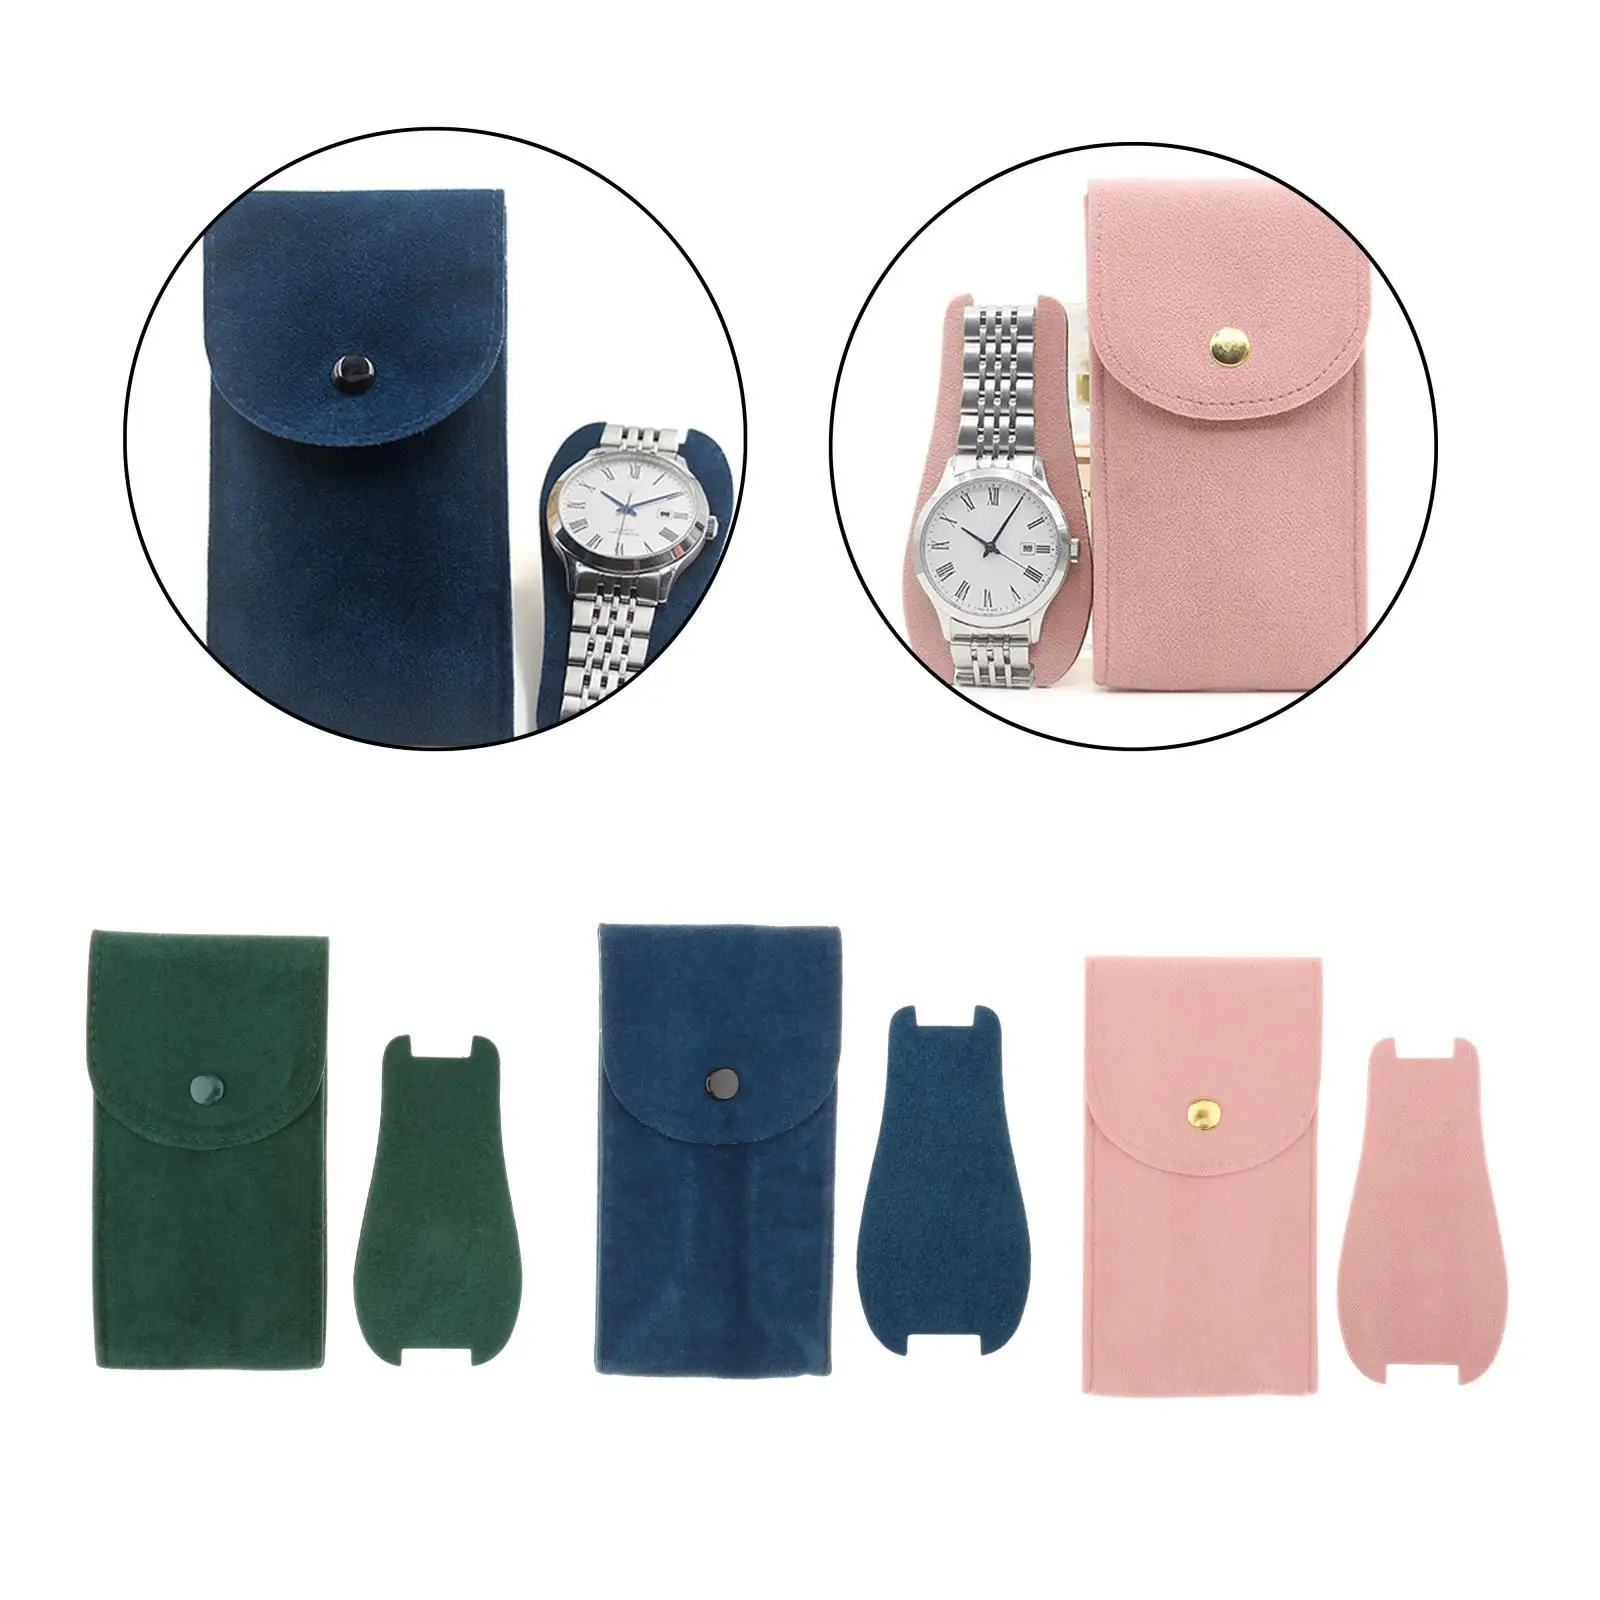 Portable Slots Storage Bag for Watches Collect Boxes